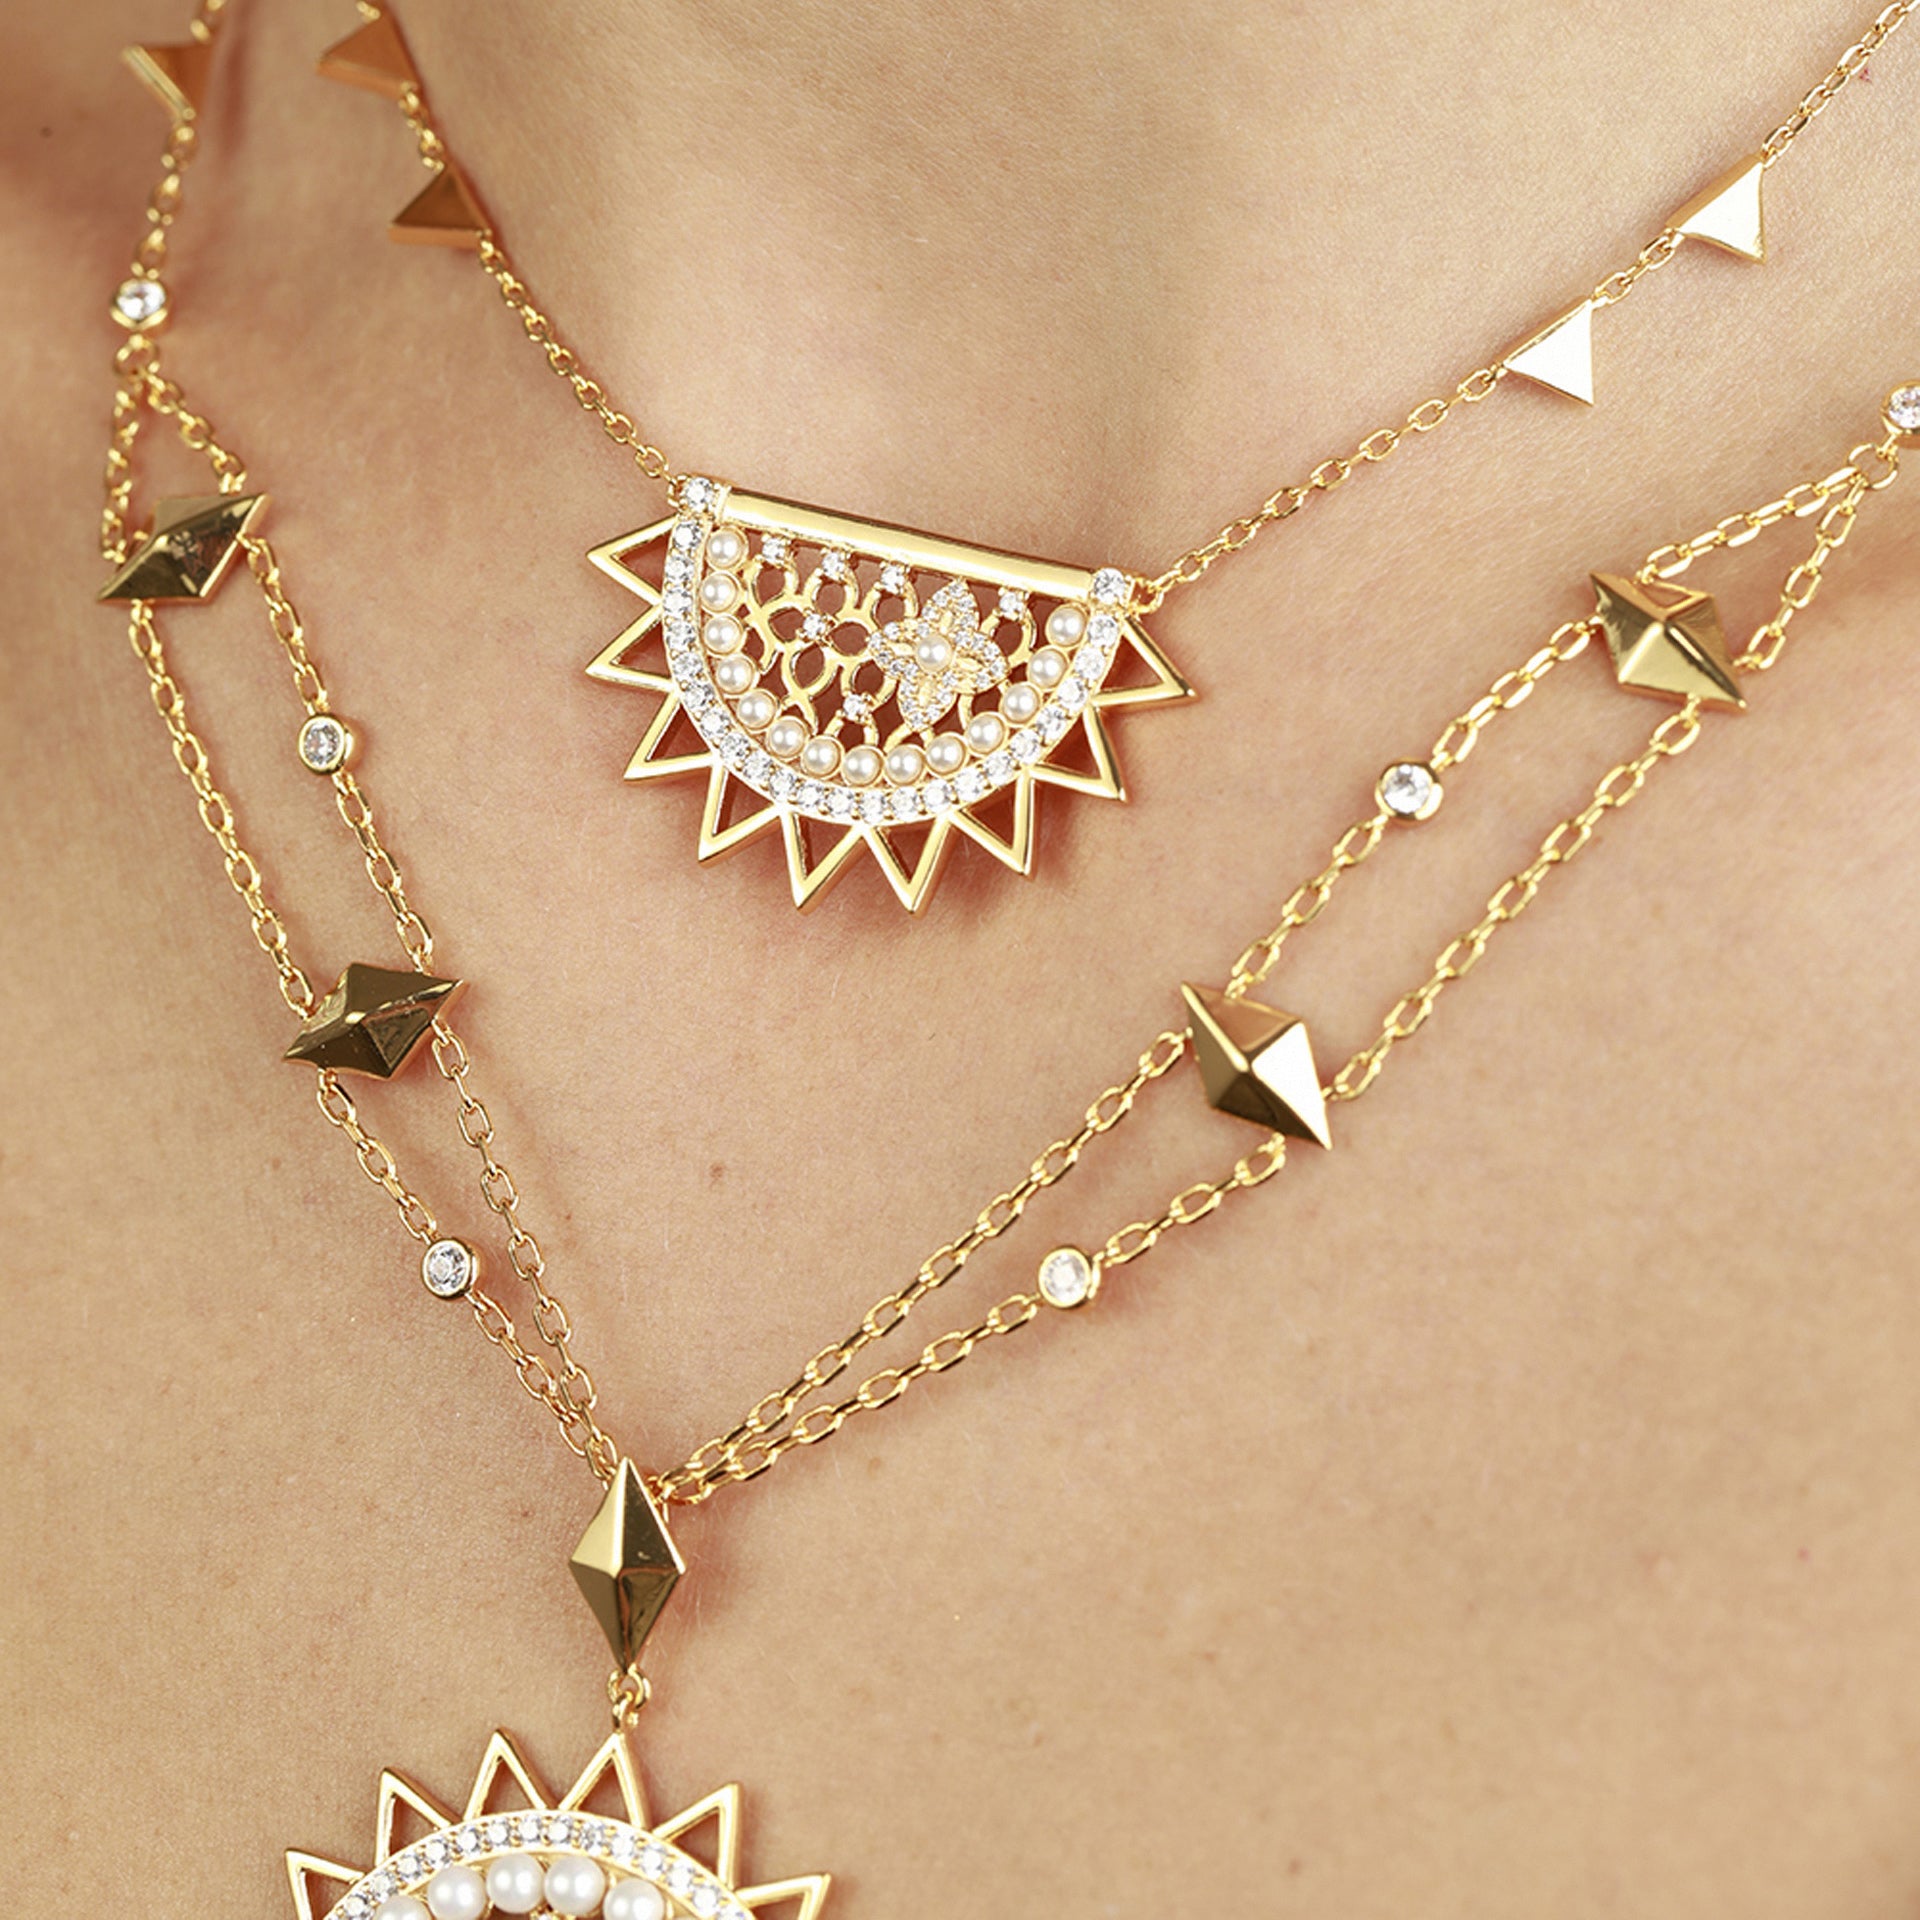 Asayel Gold Long Necklace From Le-Soleil